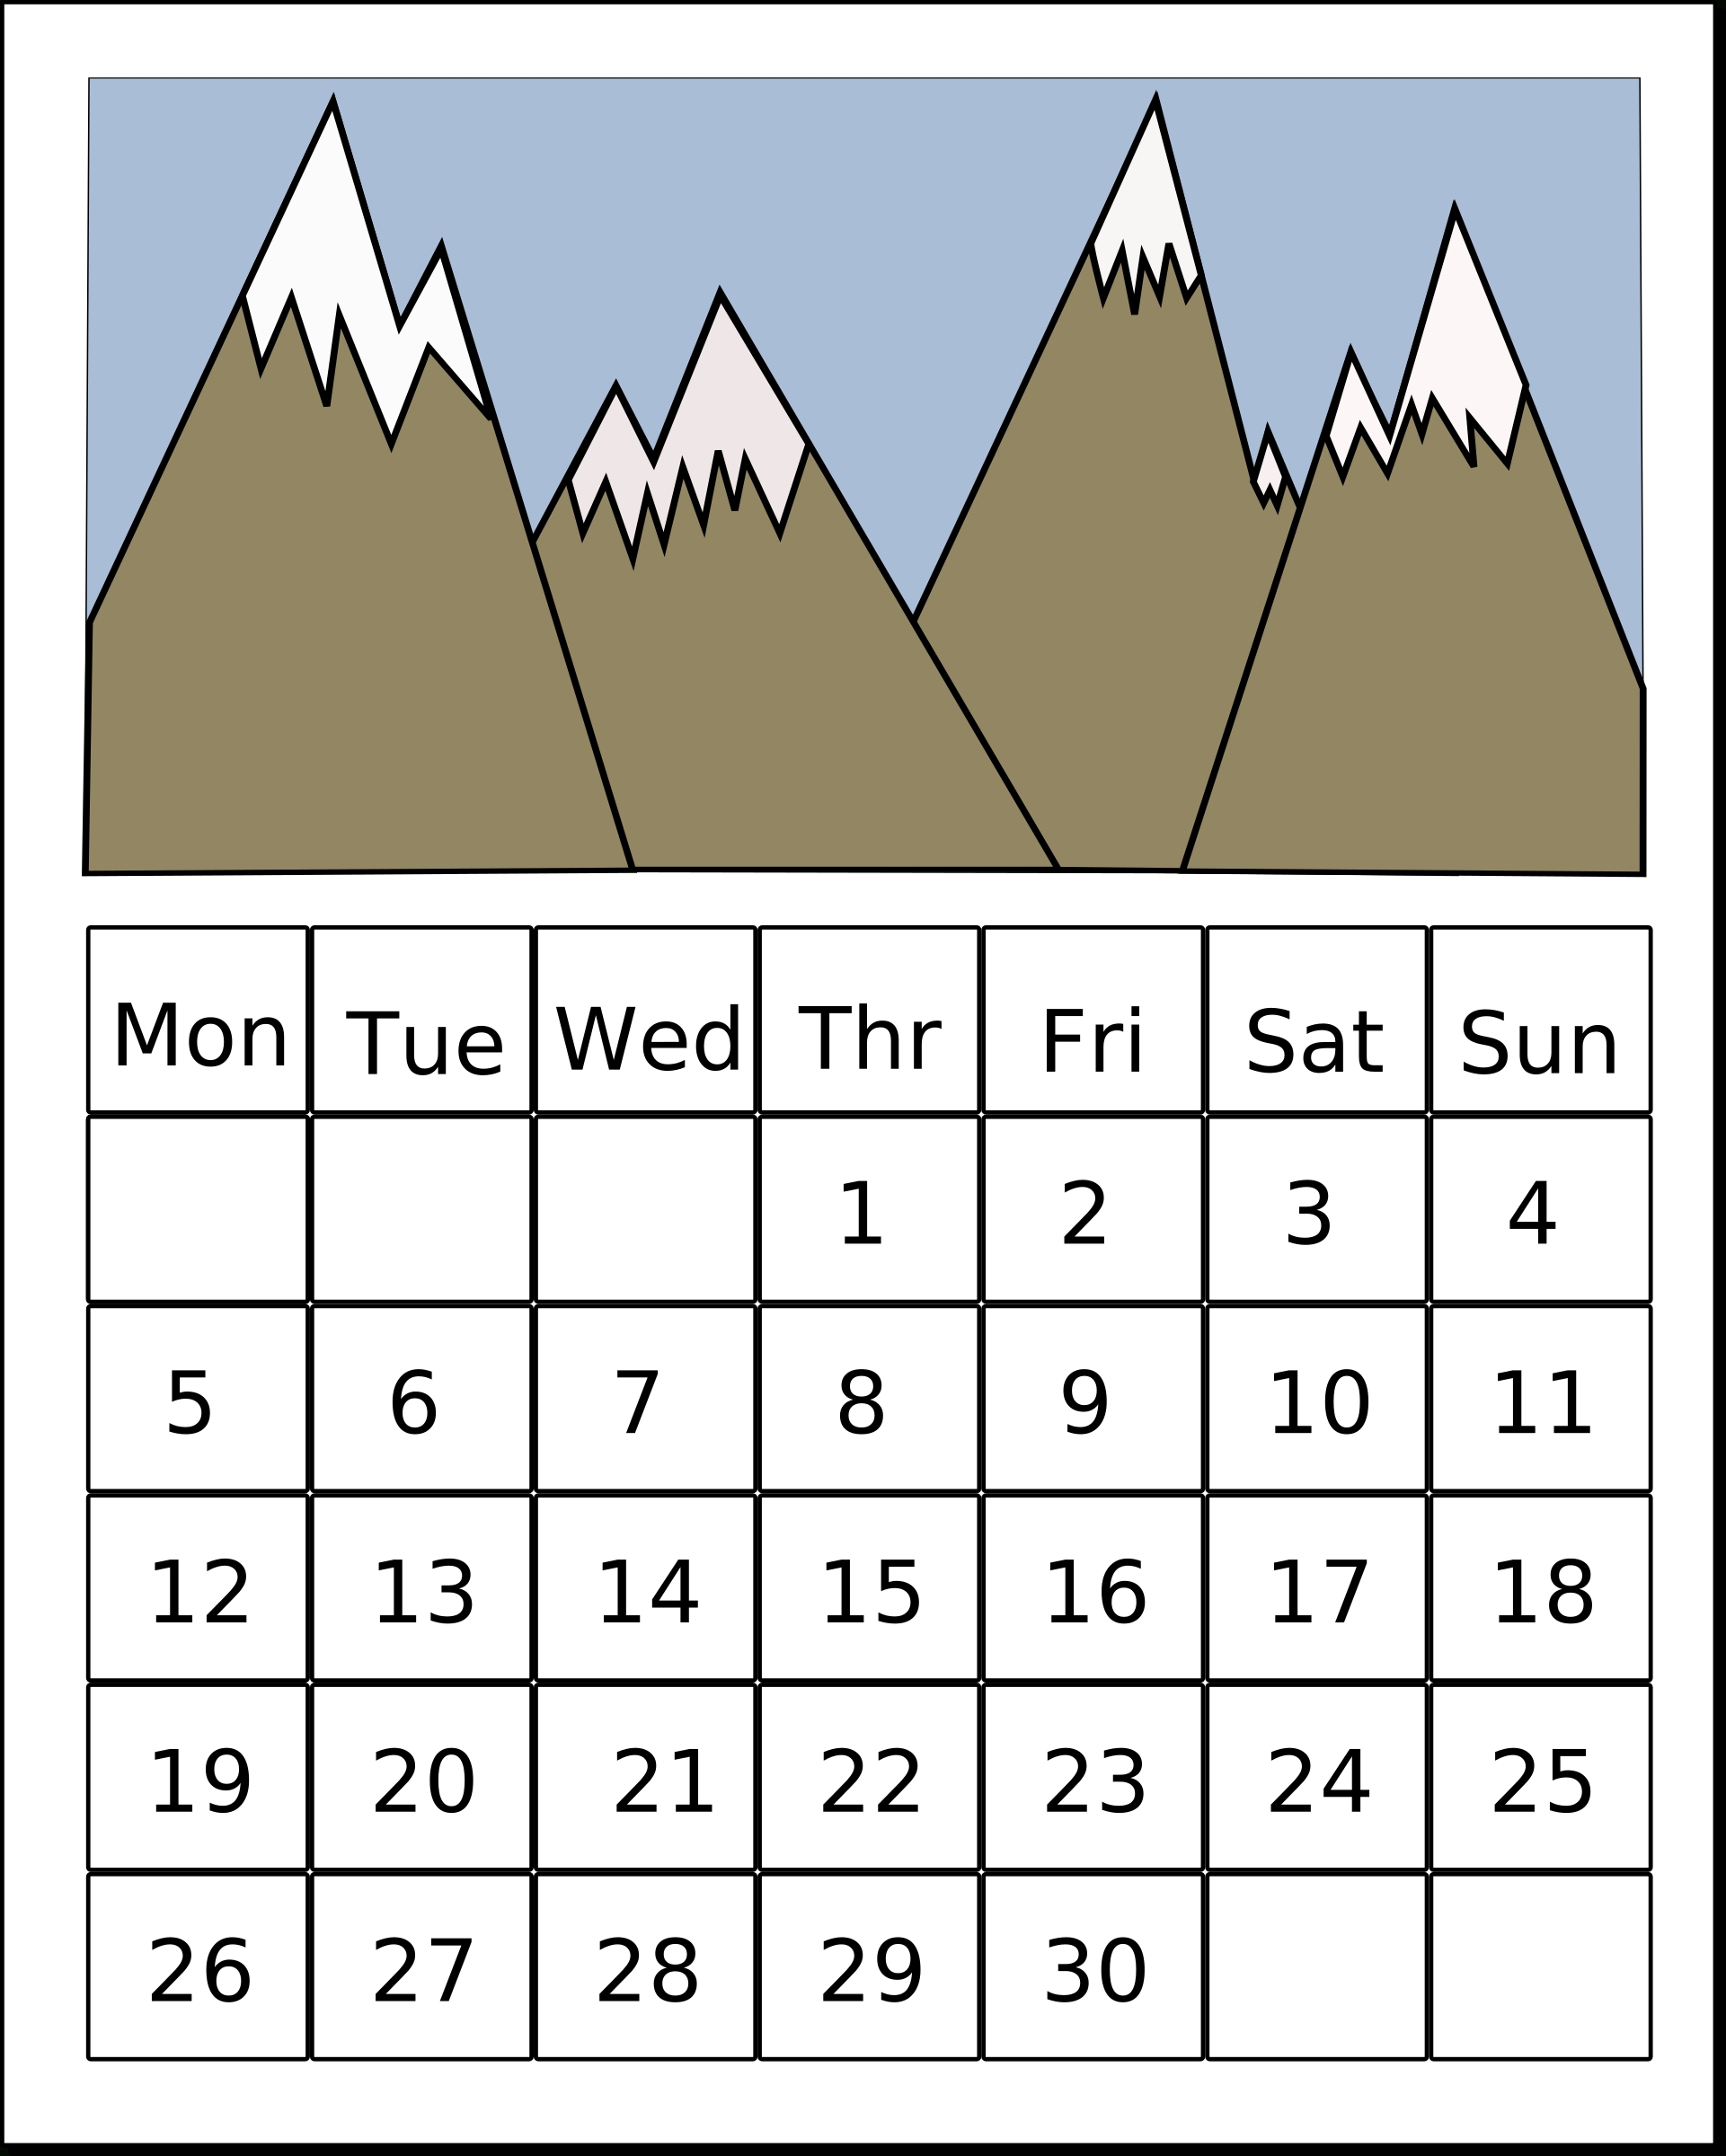 Calendar Of Stem-Related Seasonal Events And Holidays | Nise